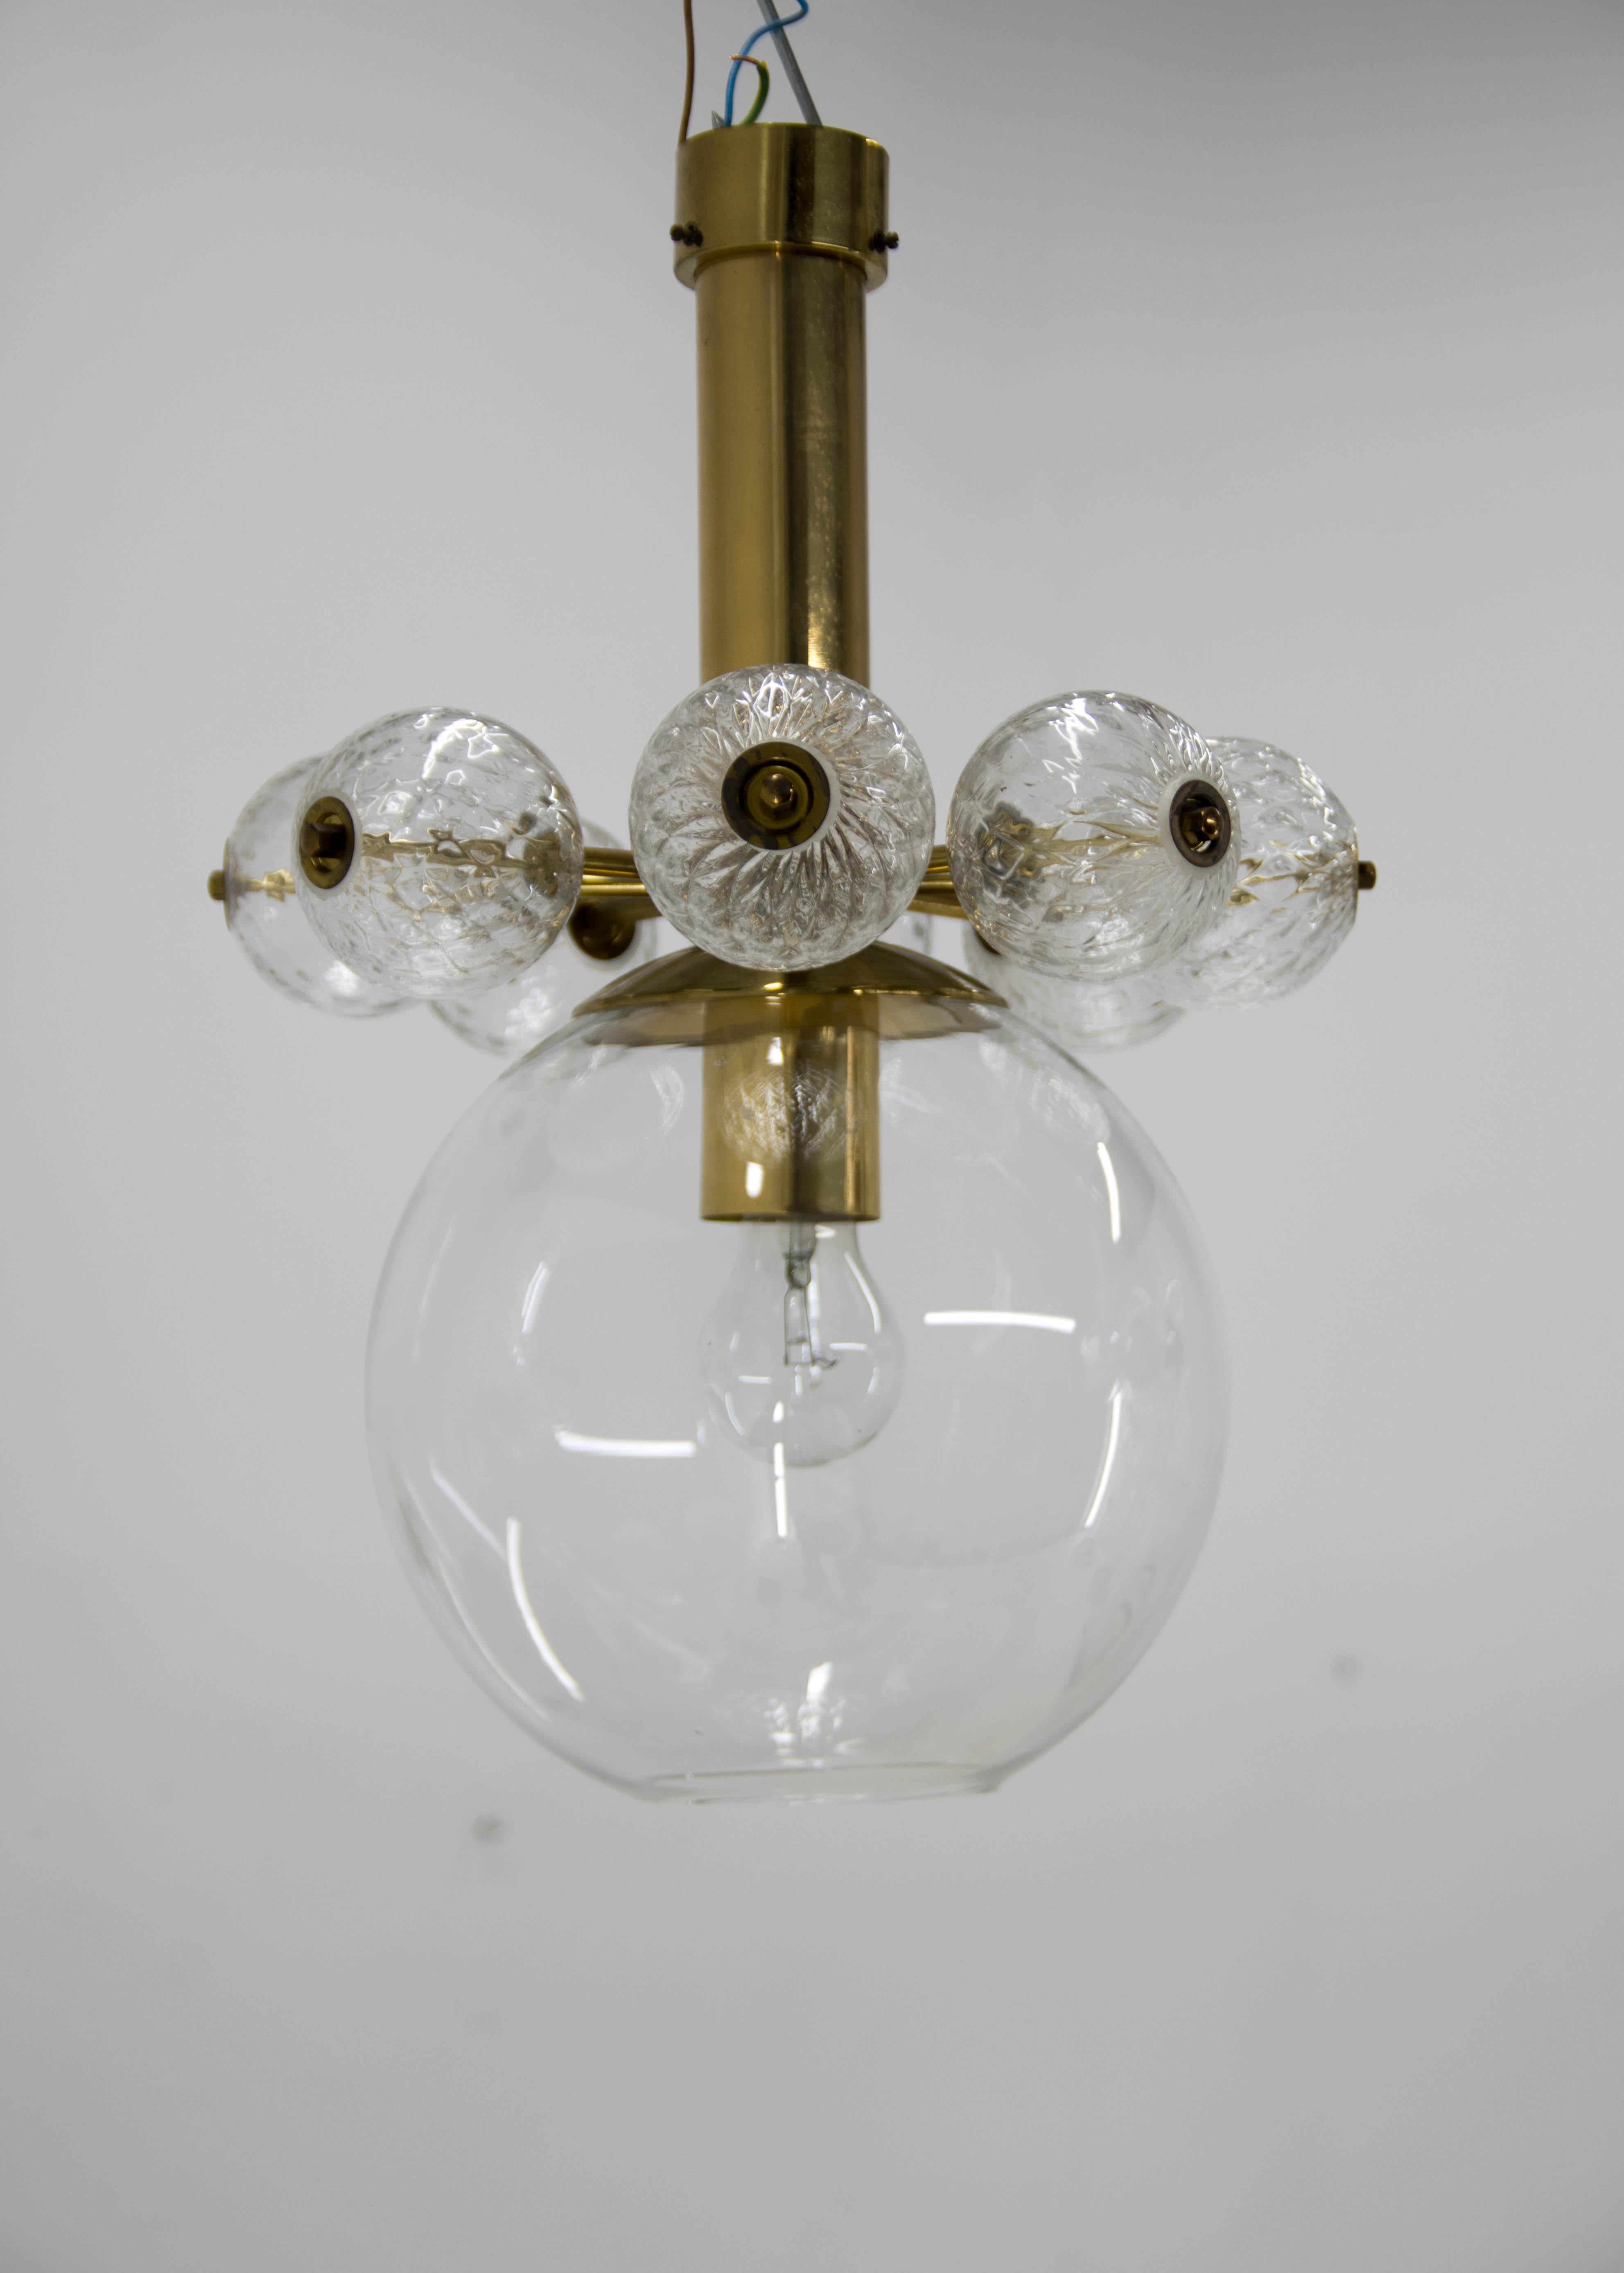 Designed by Bejvl in the 1980s, this beautiful pendant was part of a large concept of luminaires using different sizes of blown glass spheres attached in many variations to a brass structure
20 items available
1x60W, E25-E27 bulb
US wiring